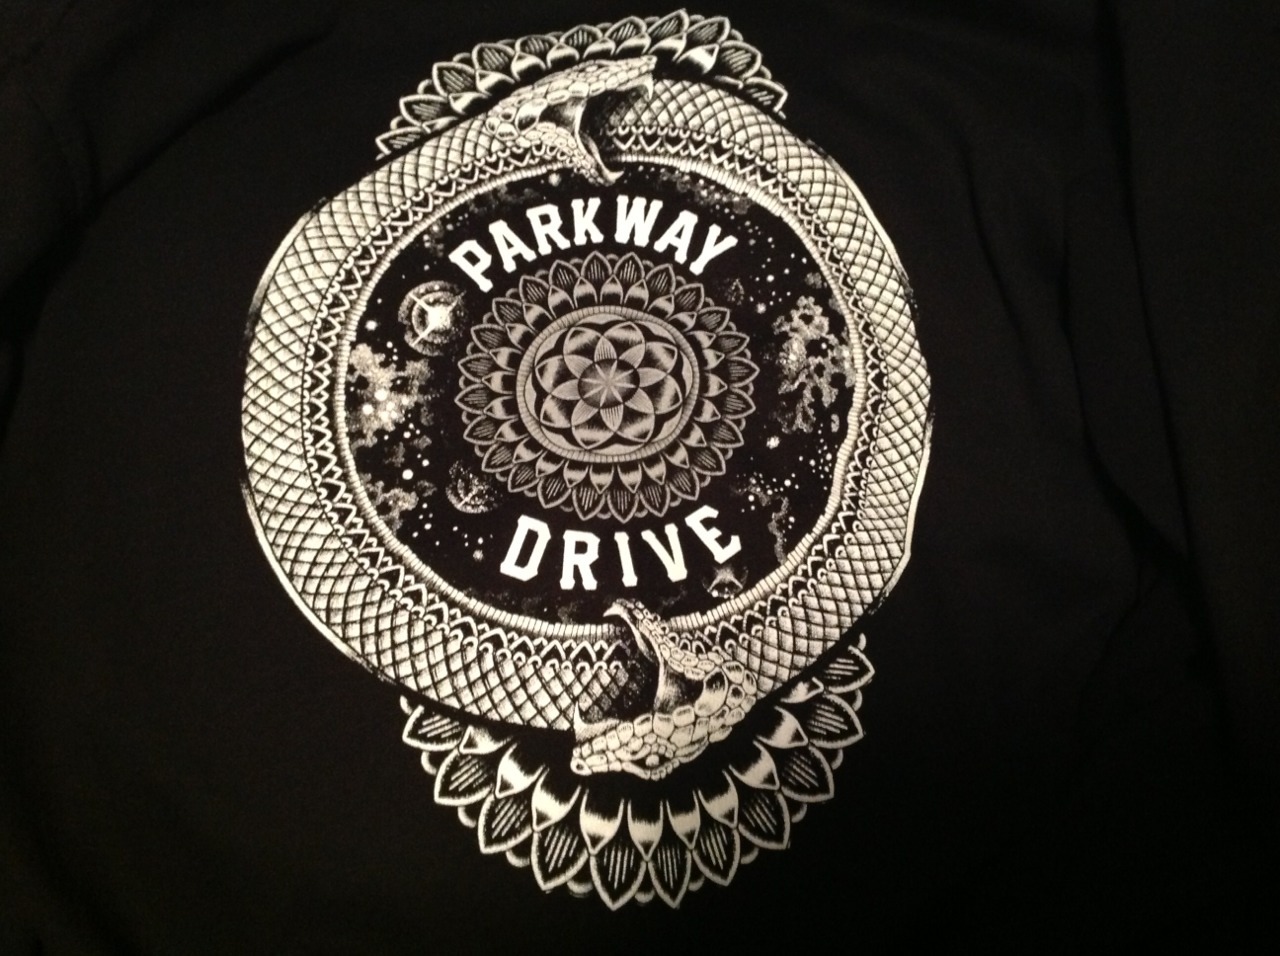 My Hoodie from tour last fall with Parkway Drive and  In Hearts Wake